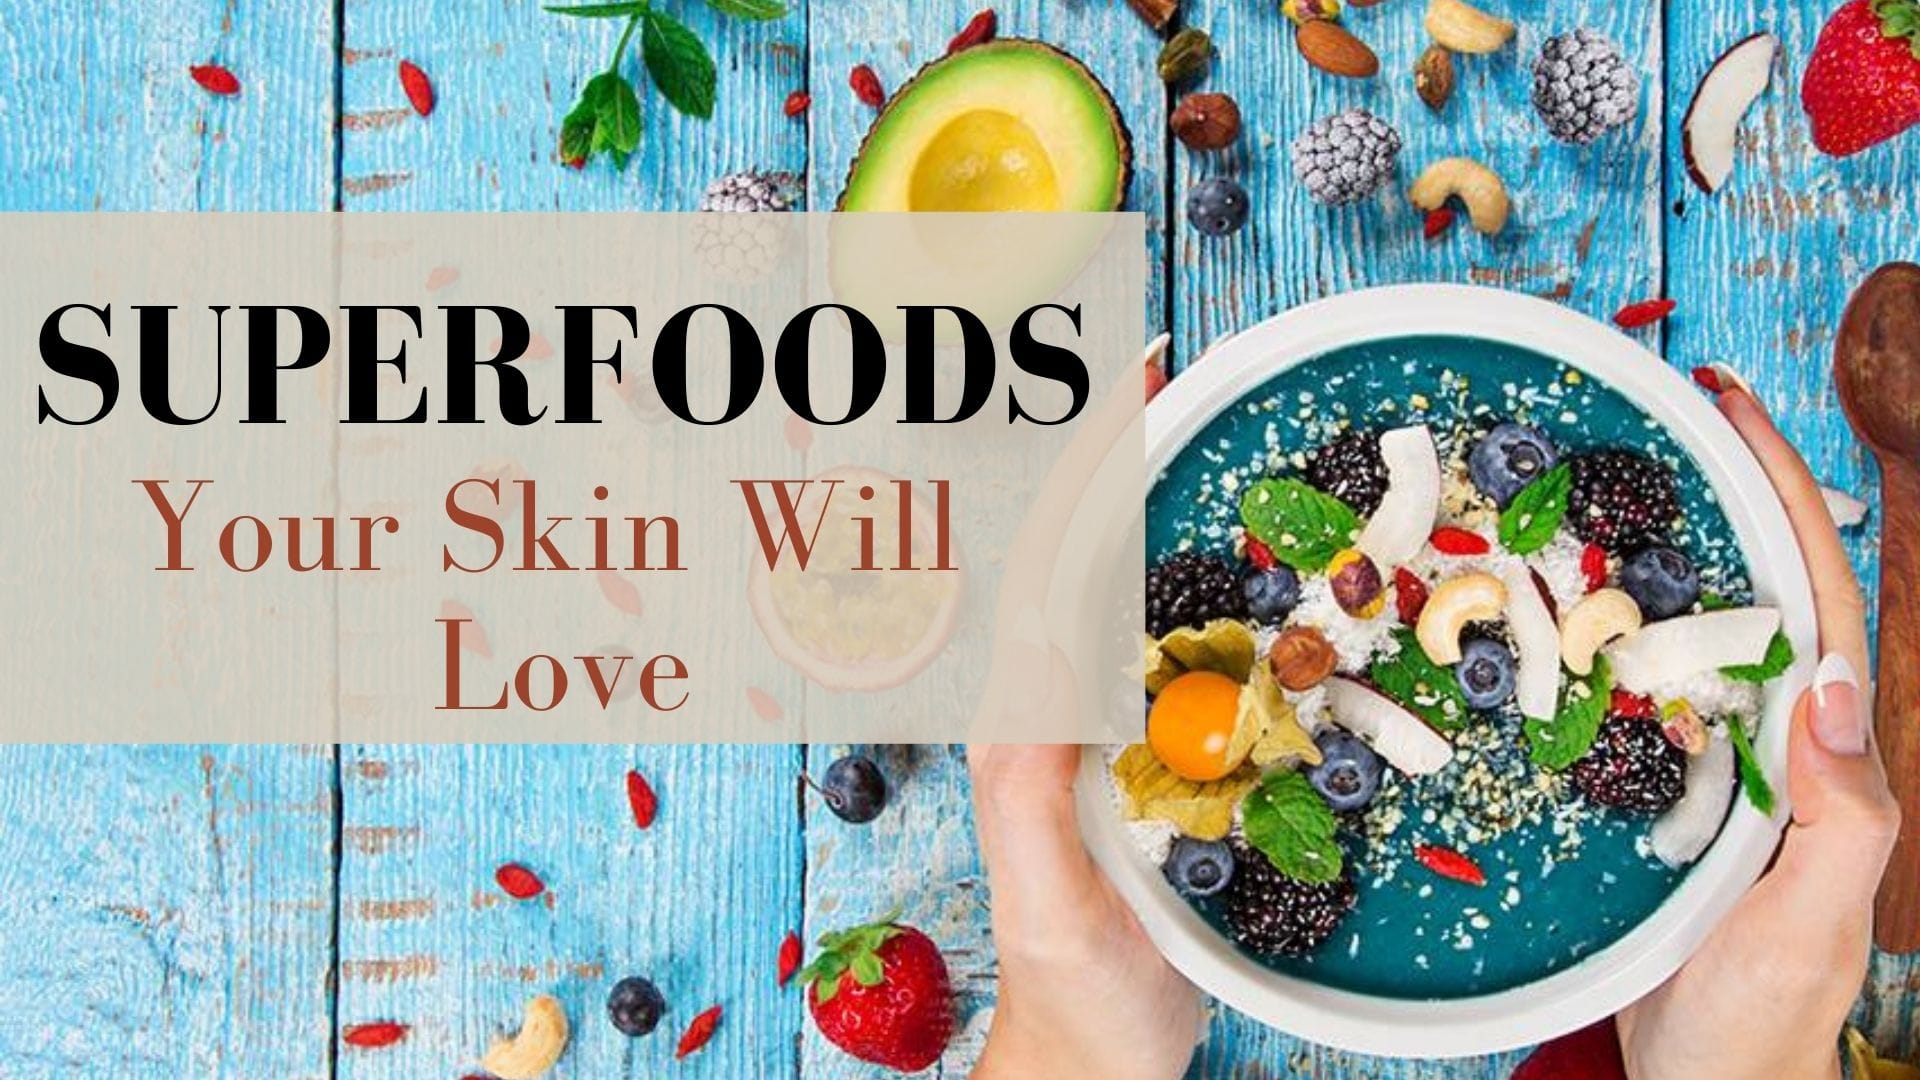 5 Superfoods You MUST Include in Your Diet For Glowing, Nourished and Healthy Skin